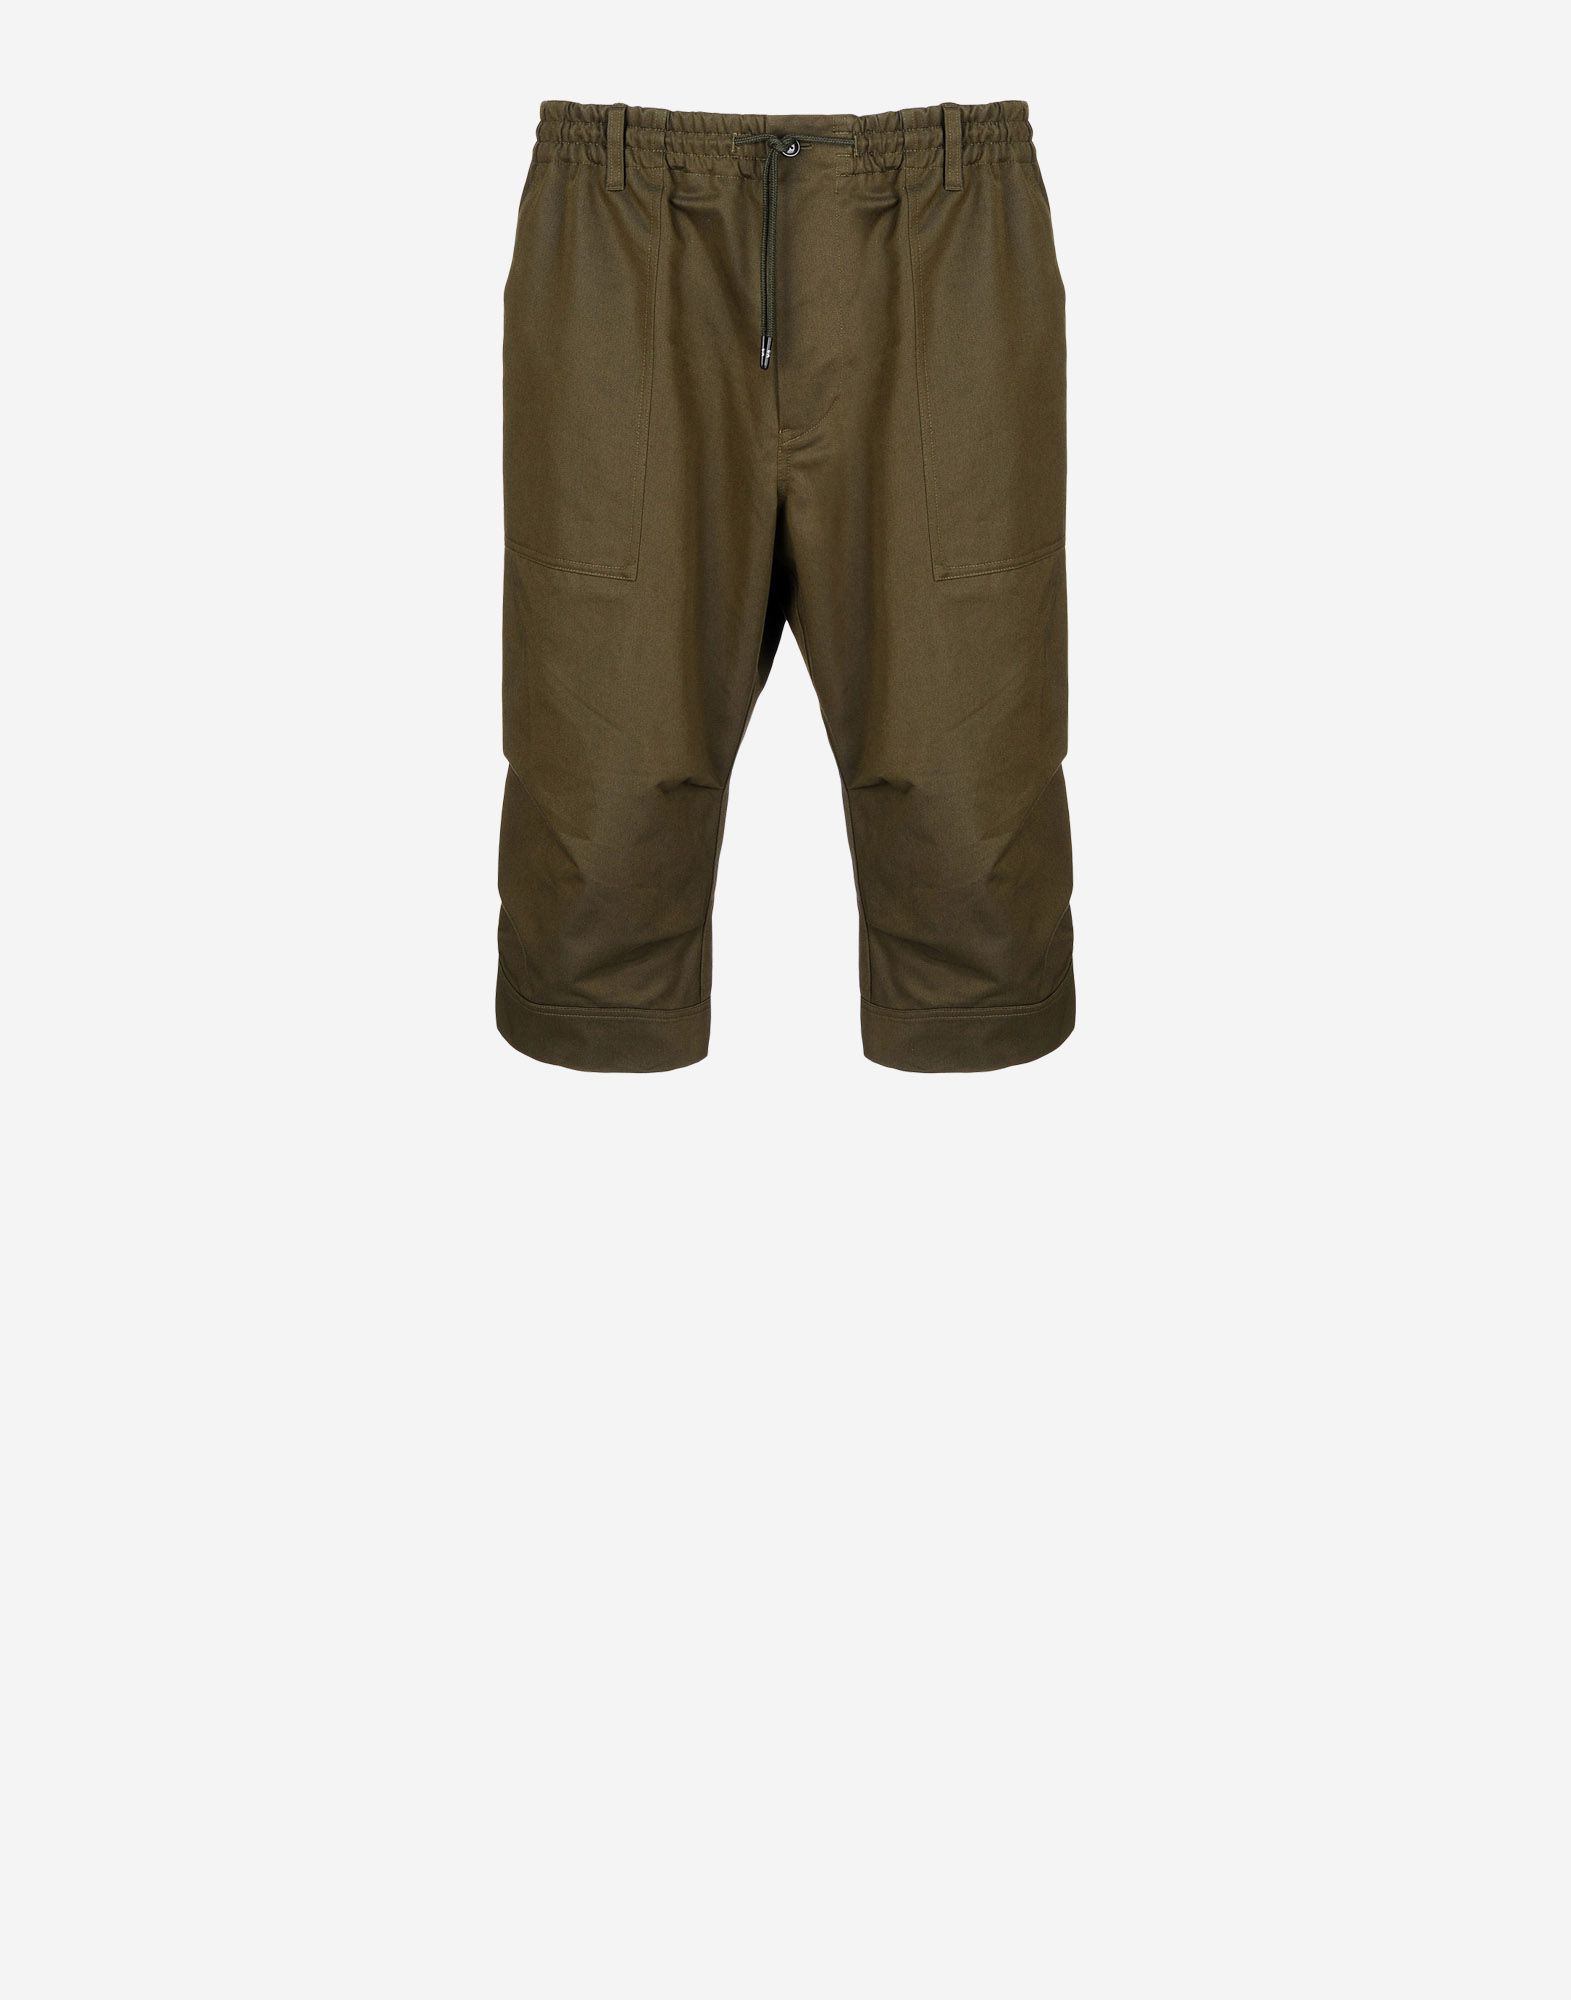 Y 3 JET SHORT PANT for Men | Adidas Y-3 Official Store